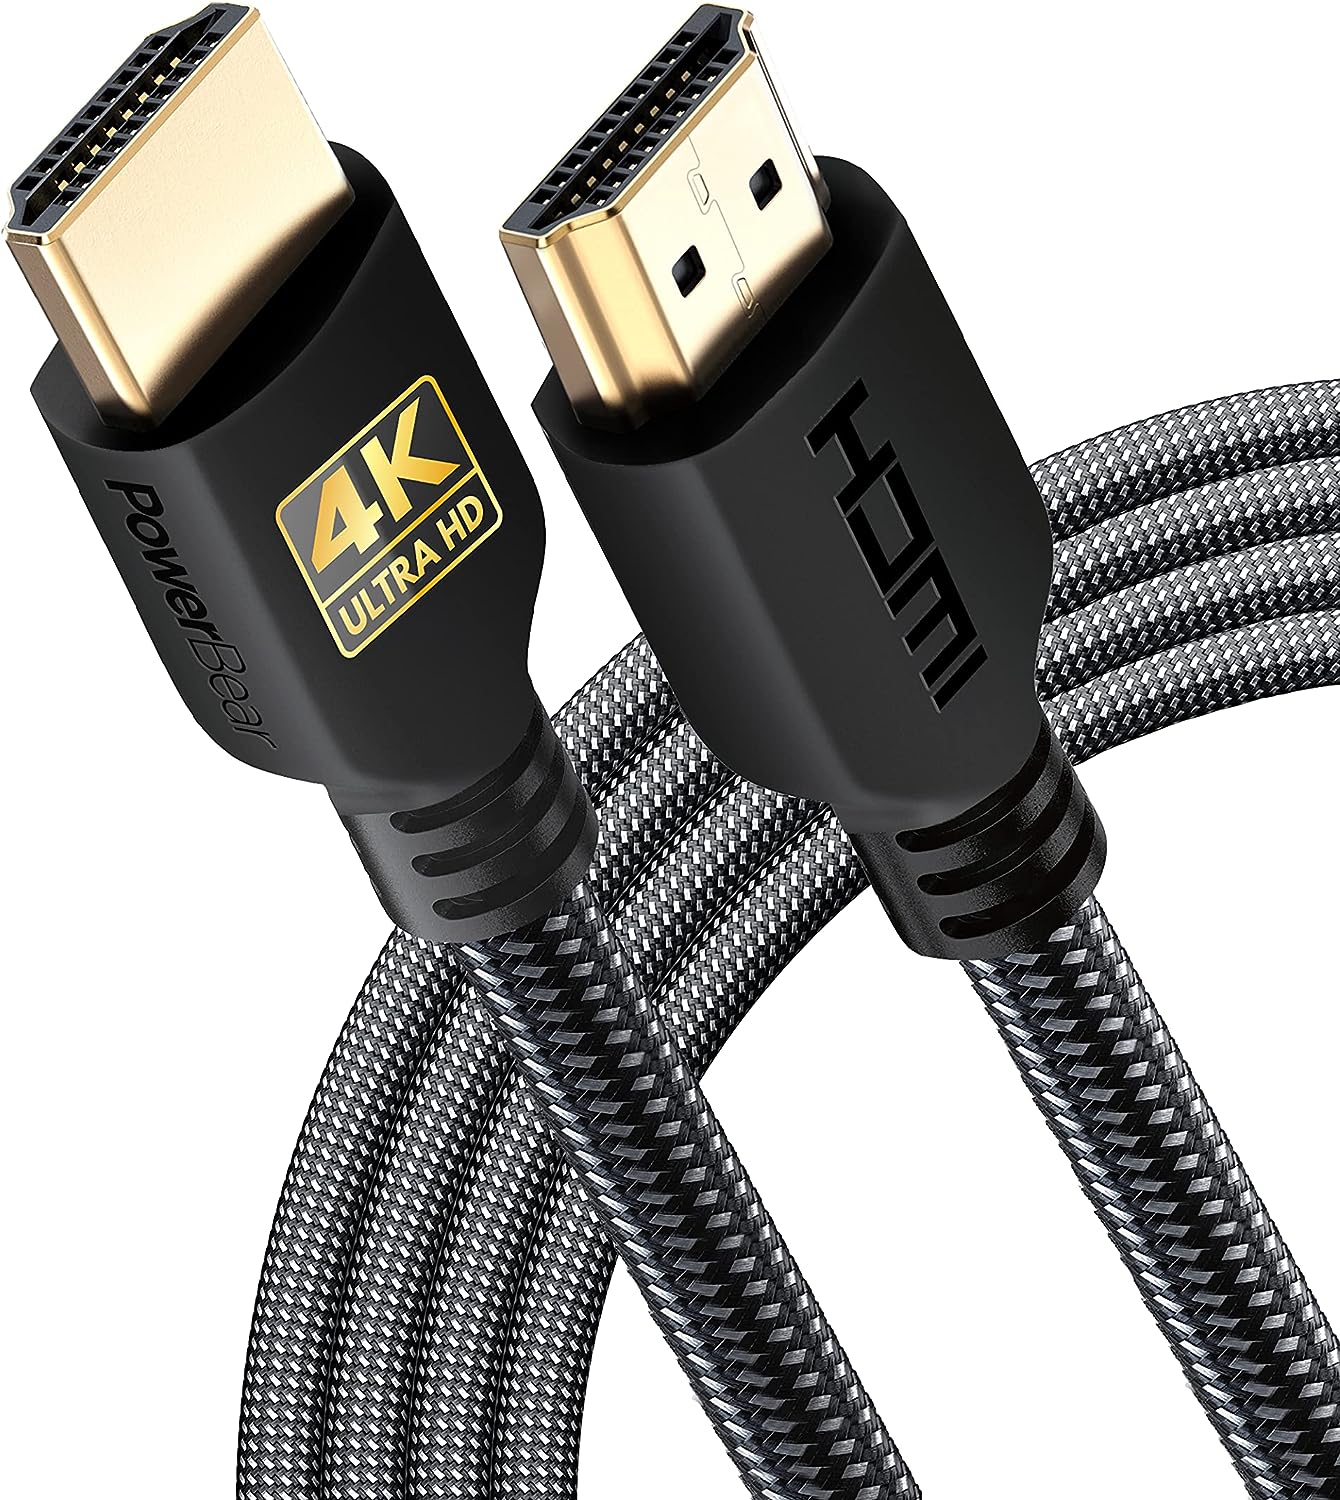 4K HDMI Cable 10 ft | High Speed Hdmi Cables, Braided Nylon & Gold Connectors, 4K @ 60Hz, Ultra HD, 2K, 1080P, ARC & CL3 Rated Florida Drone Supply Florida Drone Supply 